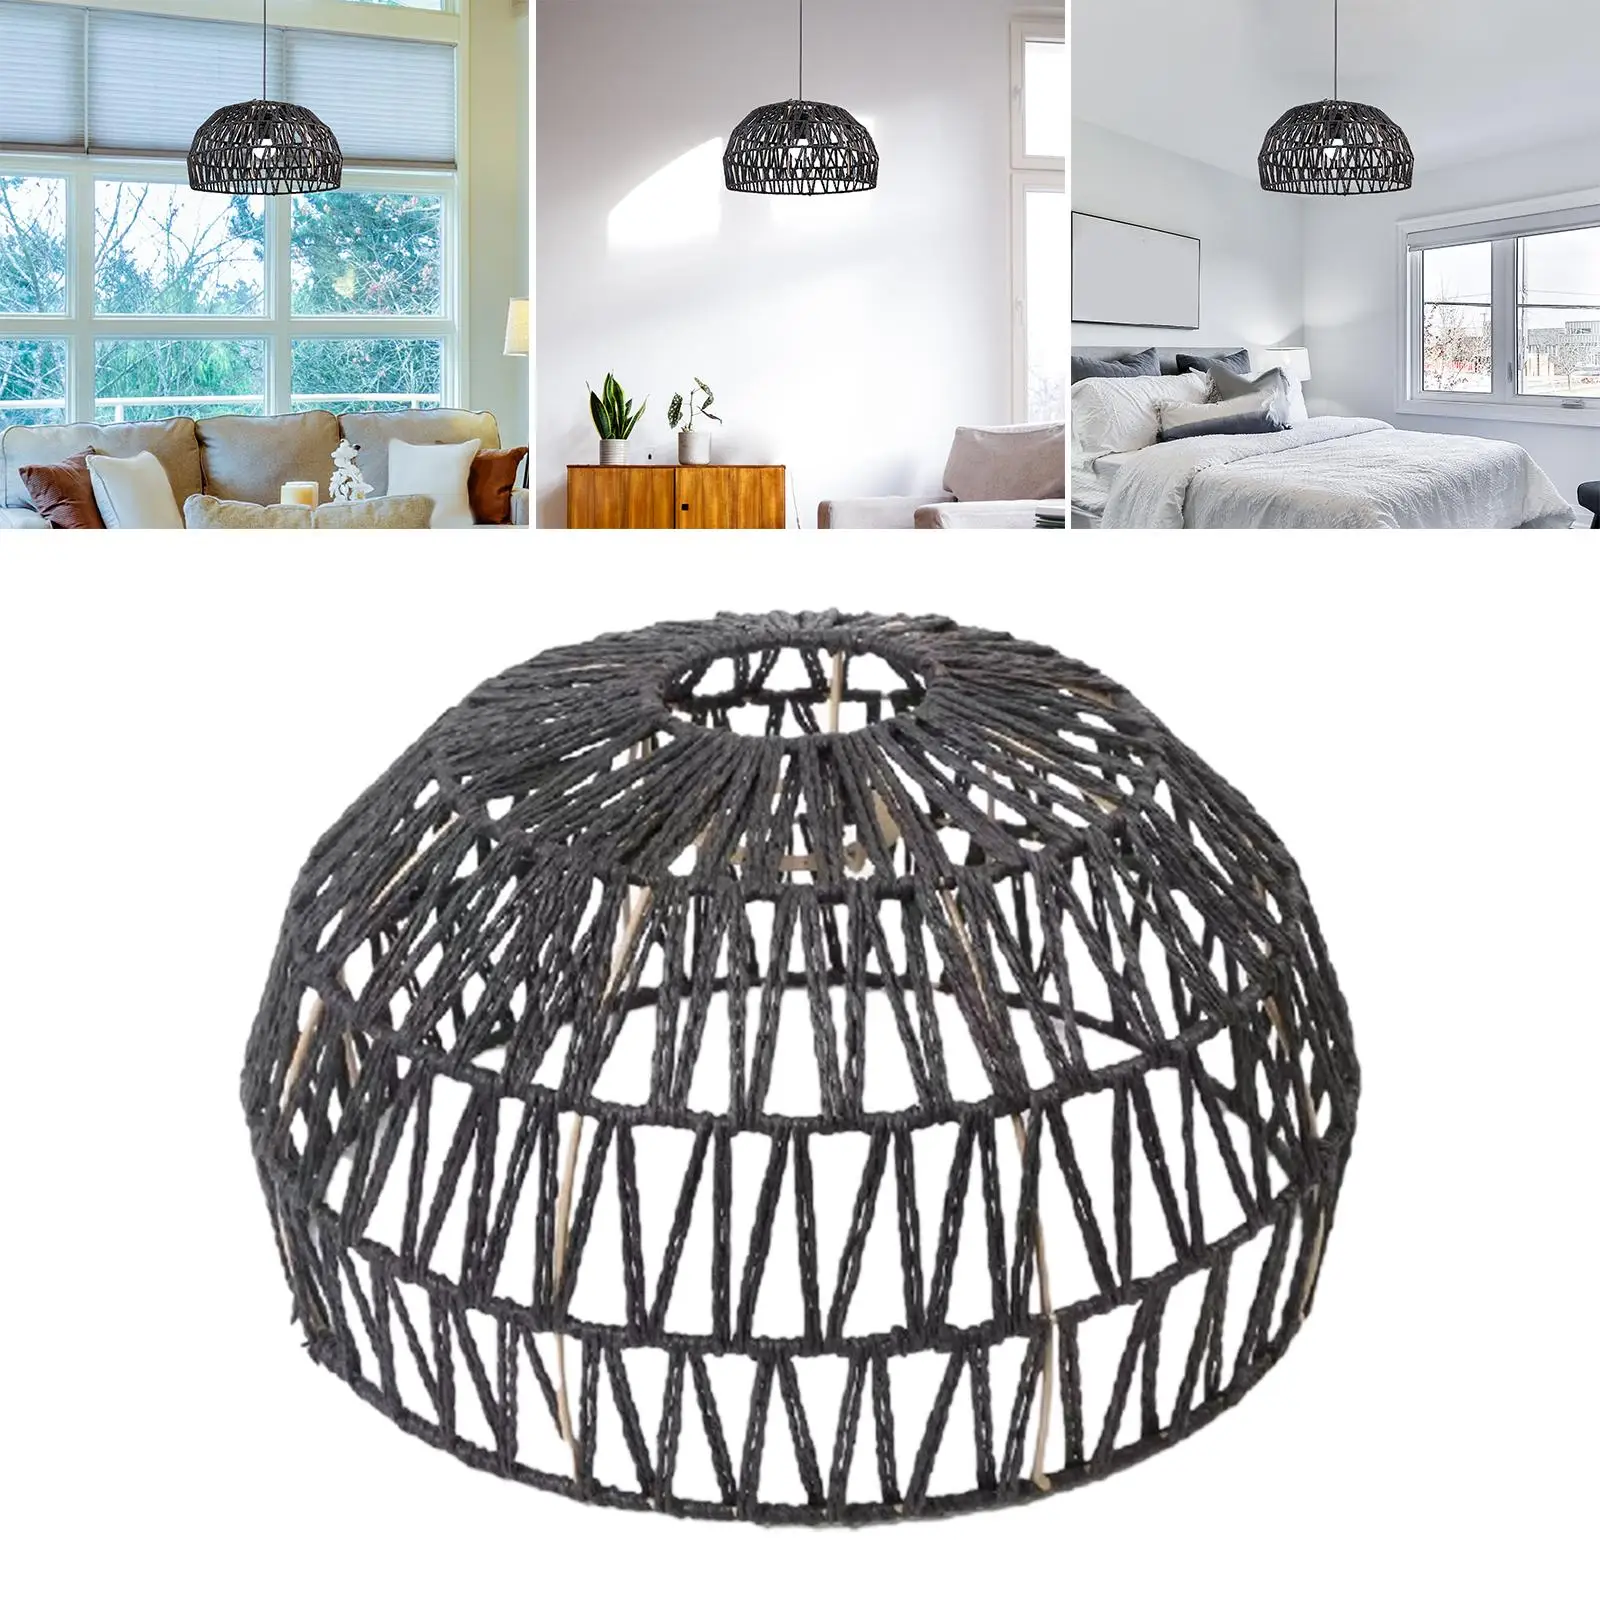 Retro Style Pendant Lamp Shade Decor Paper Rope Ceiling Light Shade Fixture Woven Chandelier Cover for Bedroom Cafe Hotel